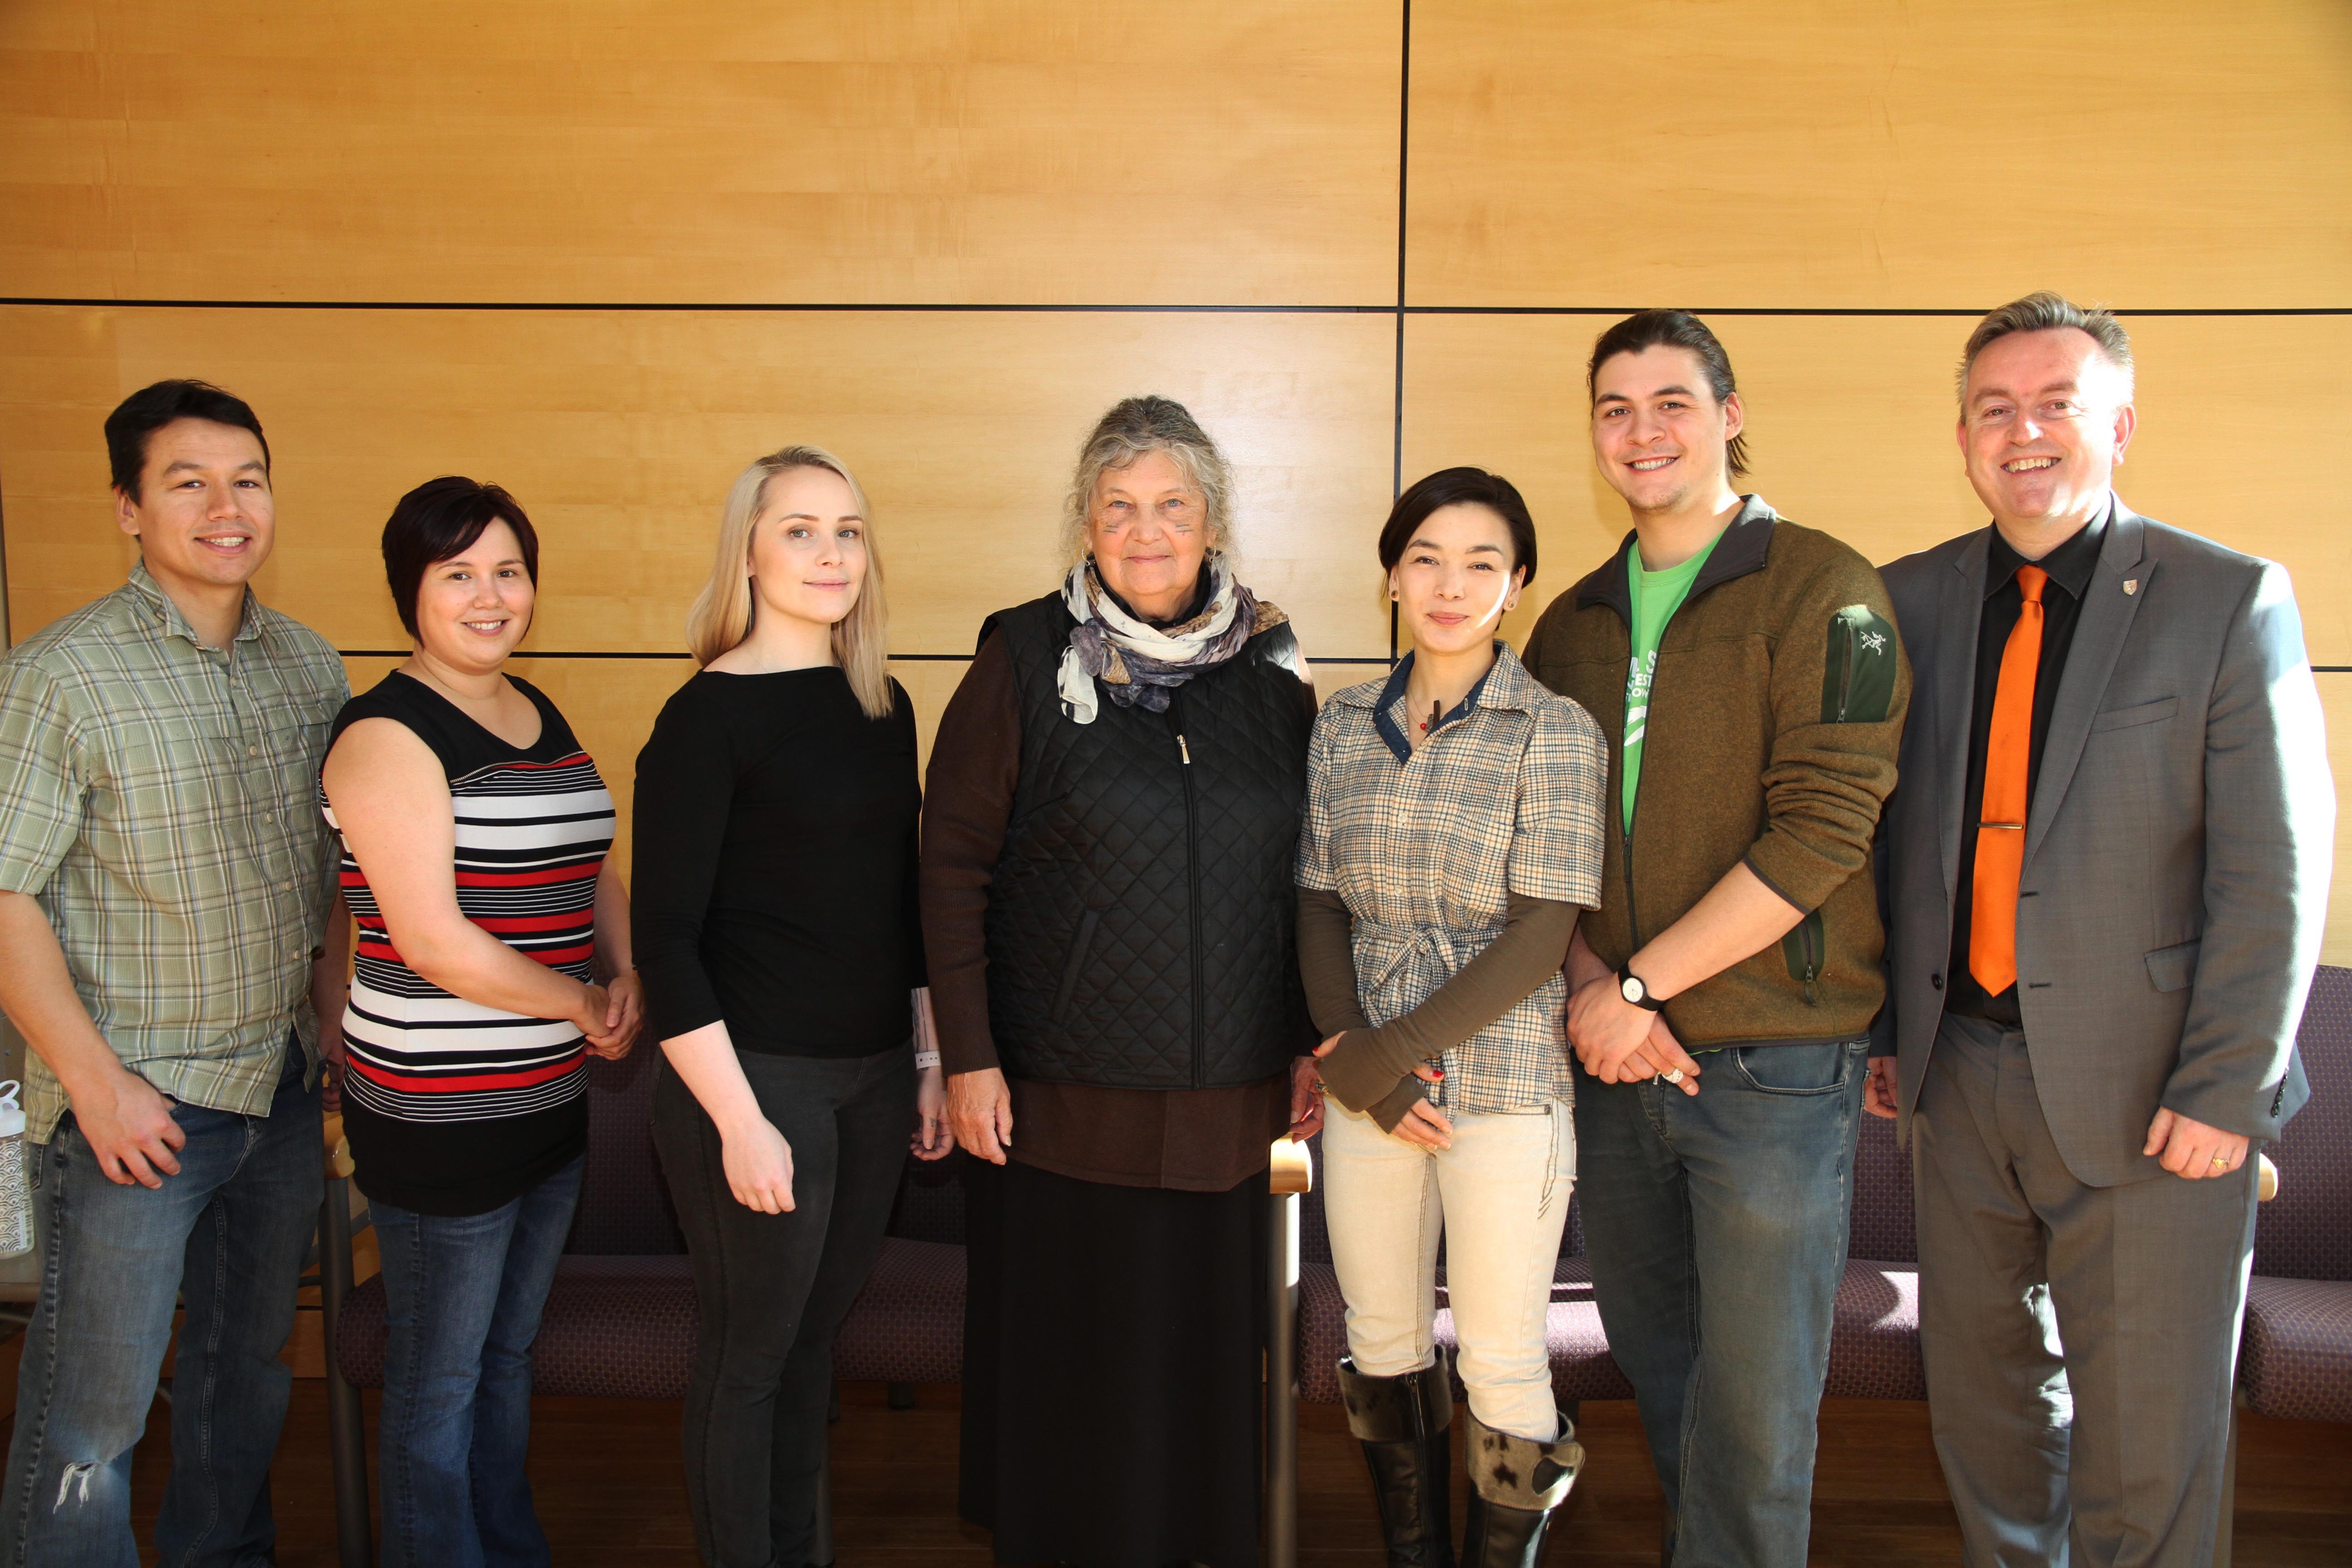 From left to right: David Lawson, Alanna Copland, Jasmine Redfern, Maria Campbell (College of Law Cultural Advisor), Angnakuluk Friesen, Robert Comeau, Martin Phillipson (Dean of Law)